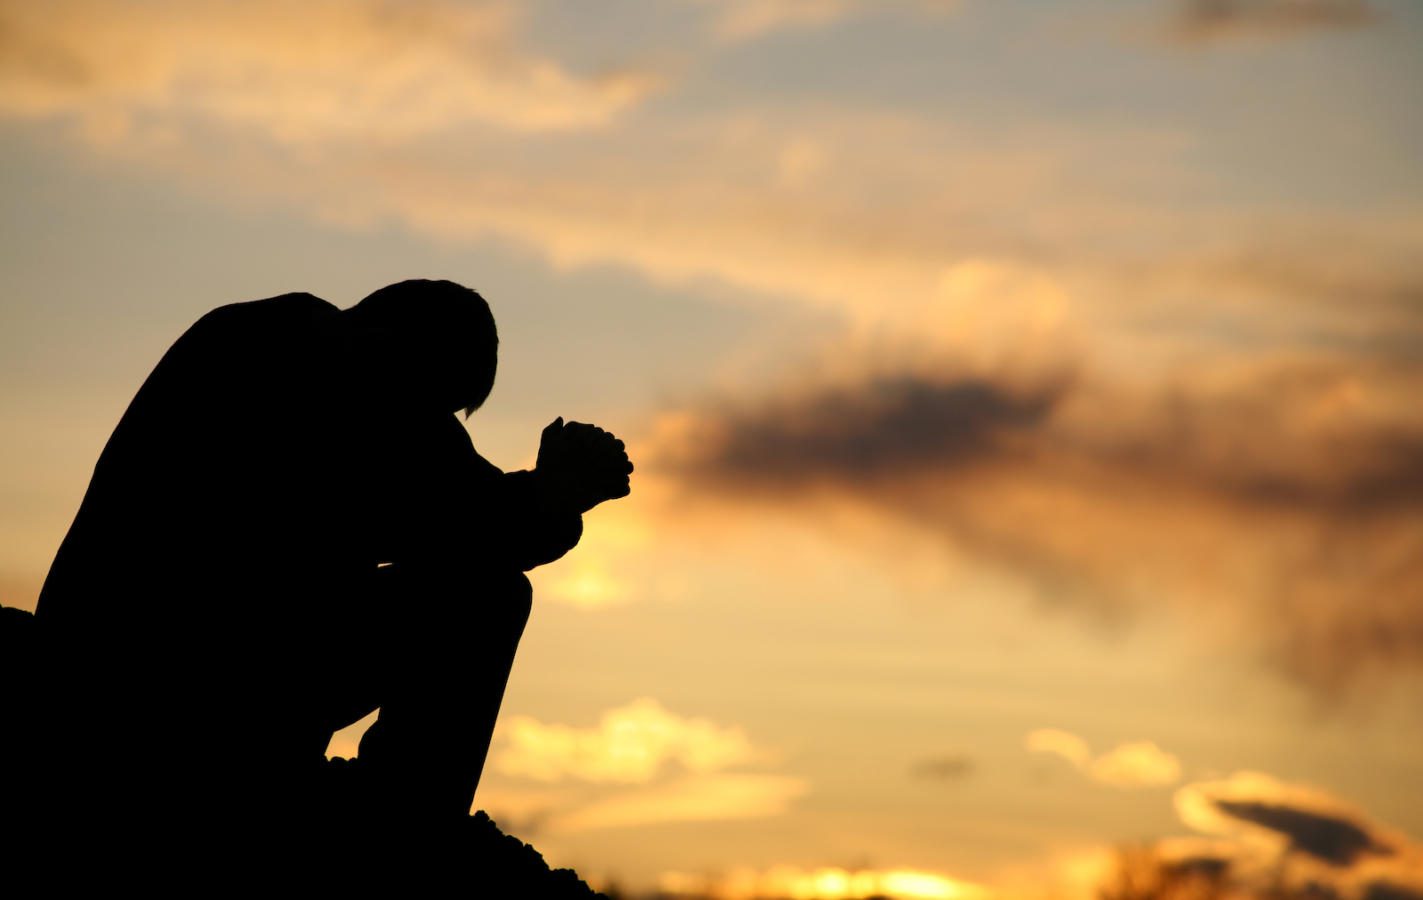 A silhouette of a man praying at sunset. Model is handsome Caucasian male in his 30s with unrecognizable side view. Model is folding his hands and bowing his head. Themes include meditation, spirituality, balance, freedom, vitality, hope, hurt, problems, addiction, struggle, anguish, help, god, healing, recovery, perseverance, coping, courage, strength, men, and asking for help.